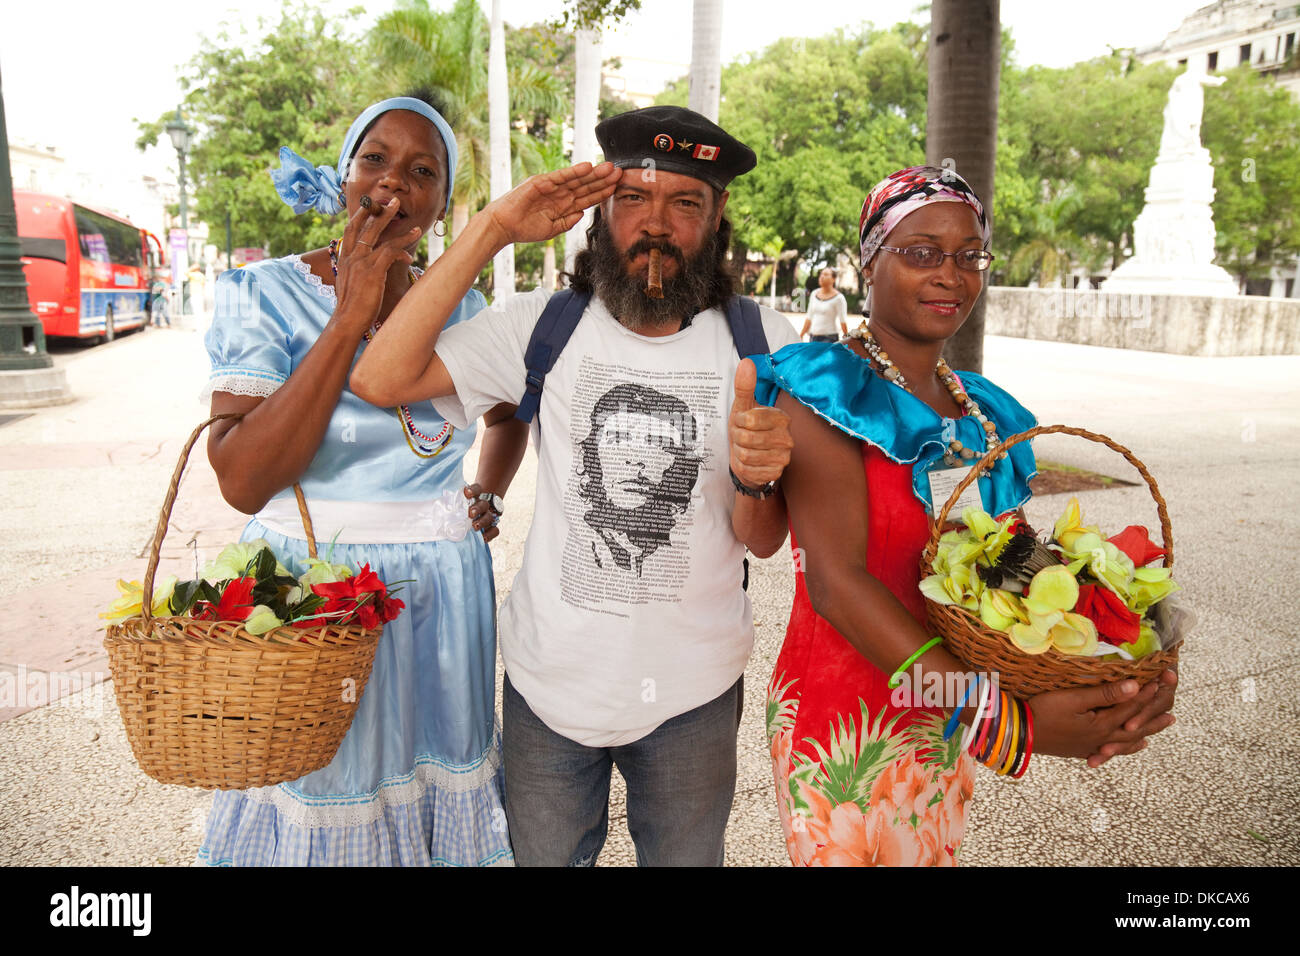 Local Cuban people dressed up and posing for tourists, Havana, Cuba,  Caribbean Stock Photo - Alamy